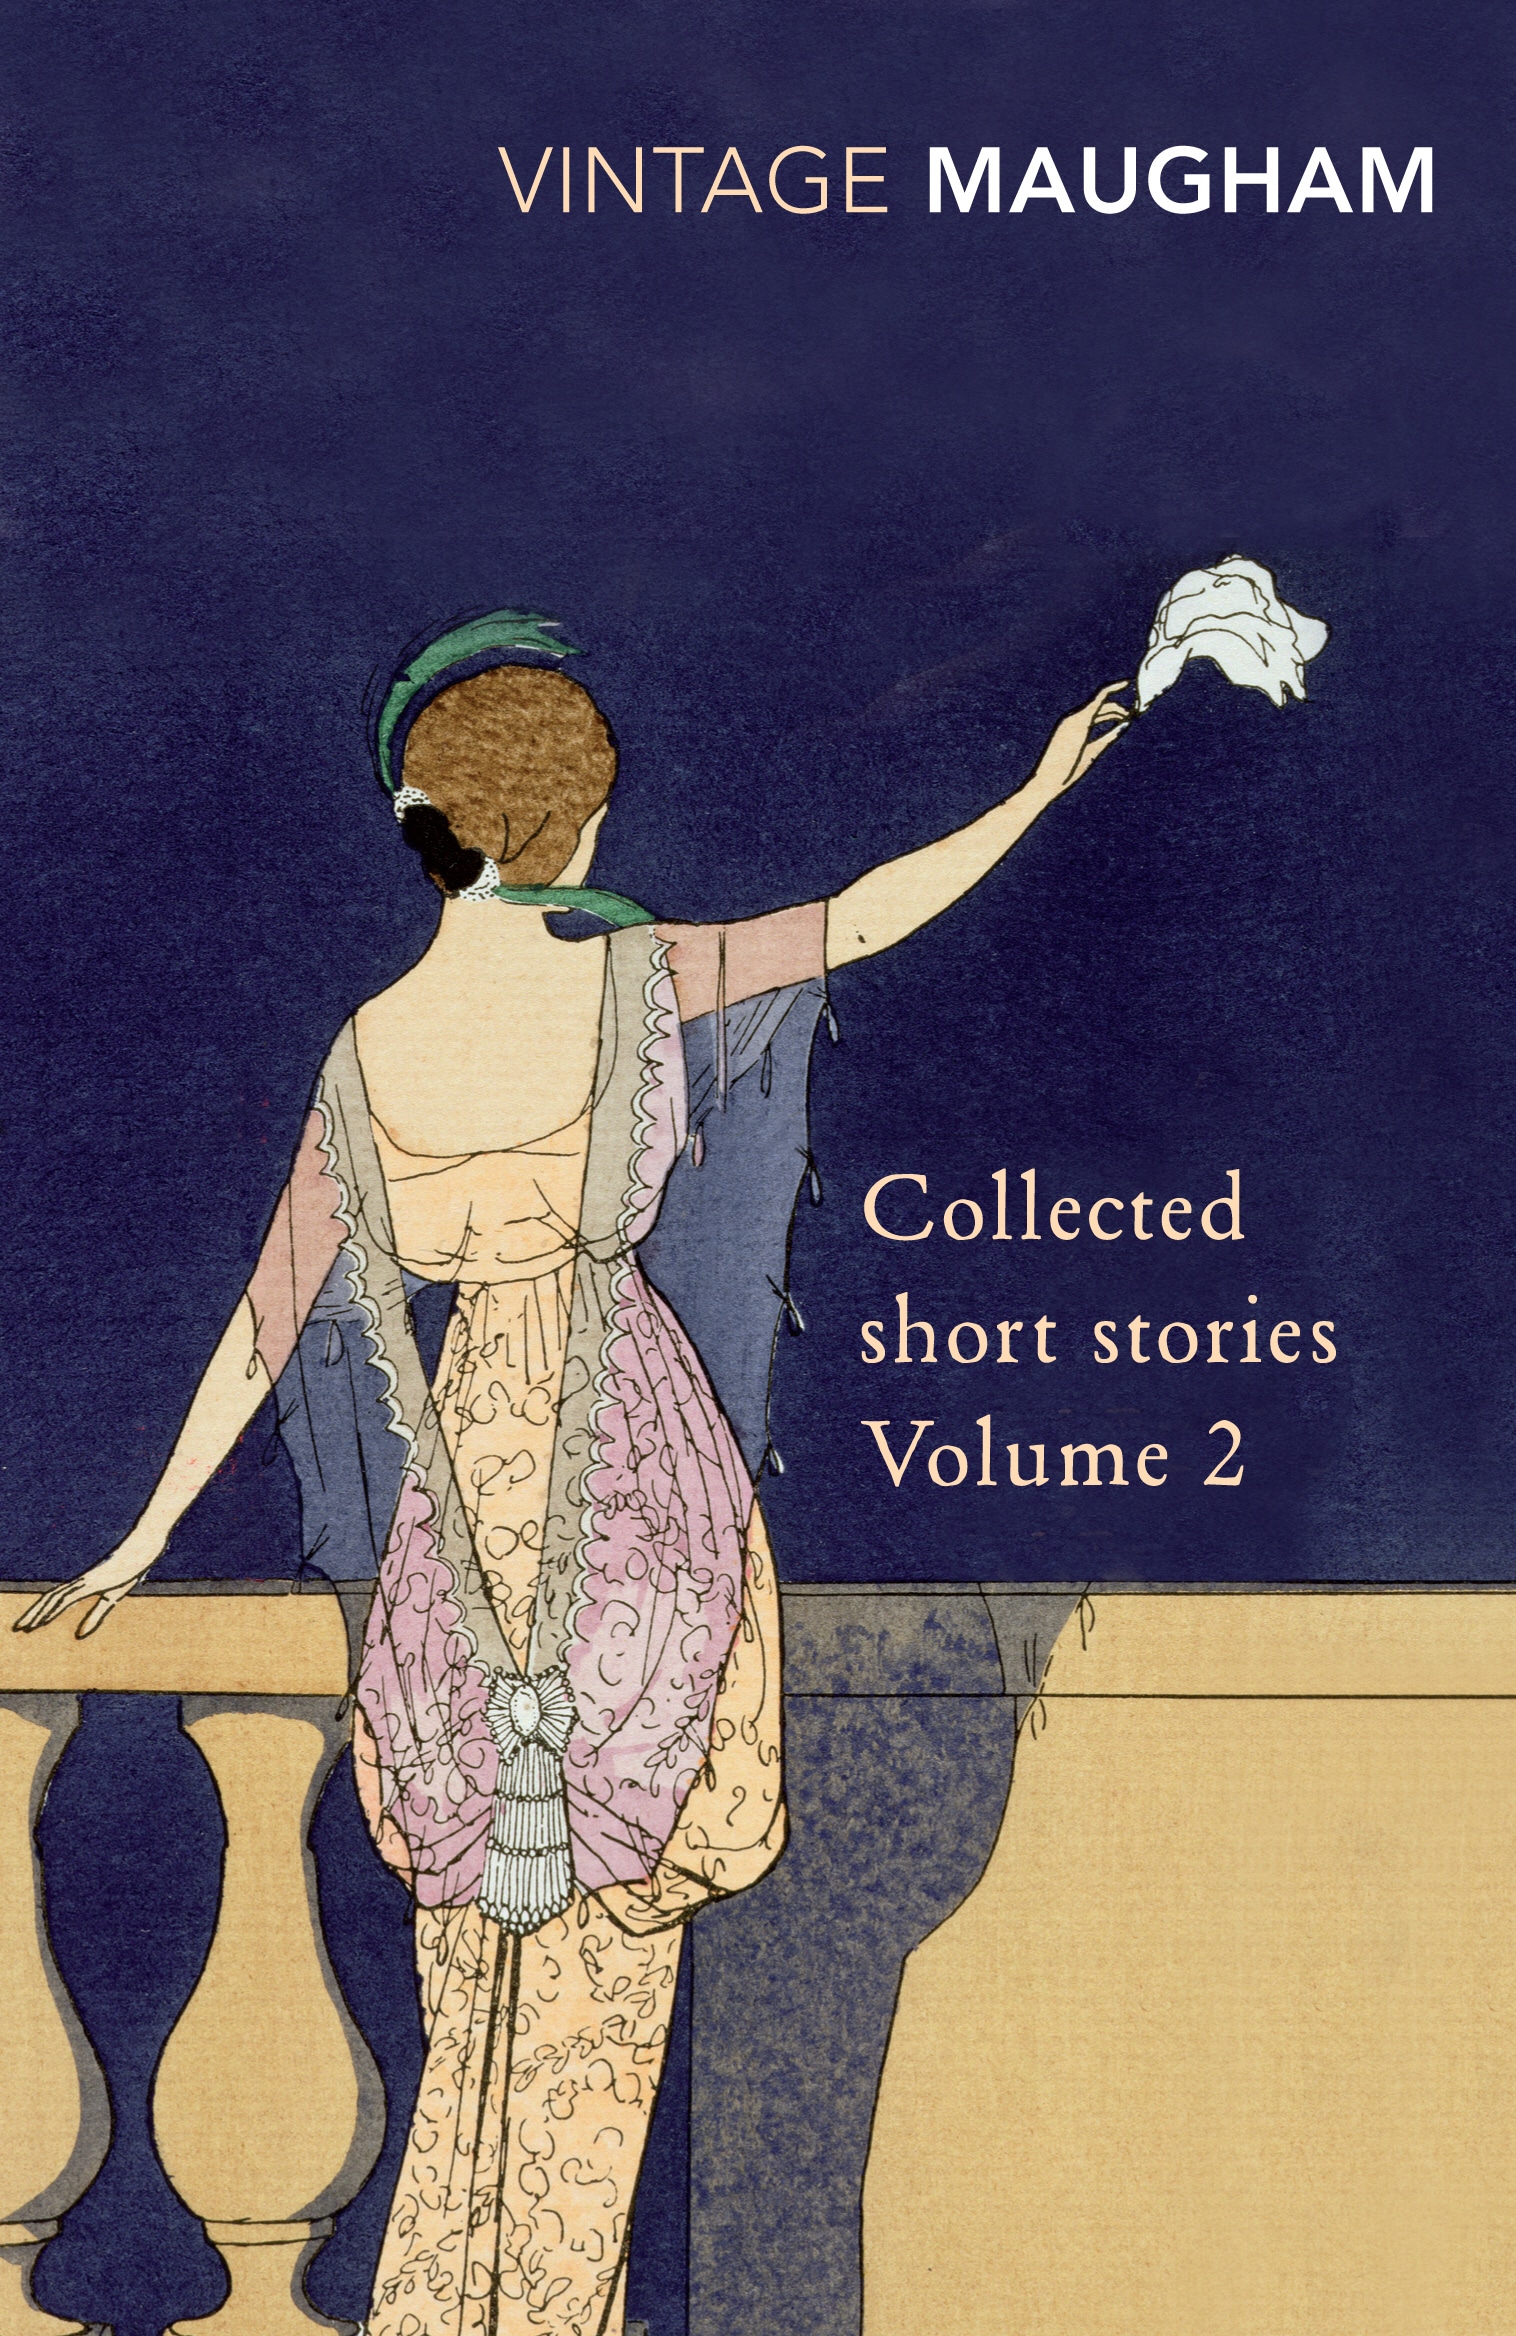 Book “Collected Short Stories Volume 2” by W. Somerset Maugham — January 3, 2002